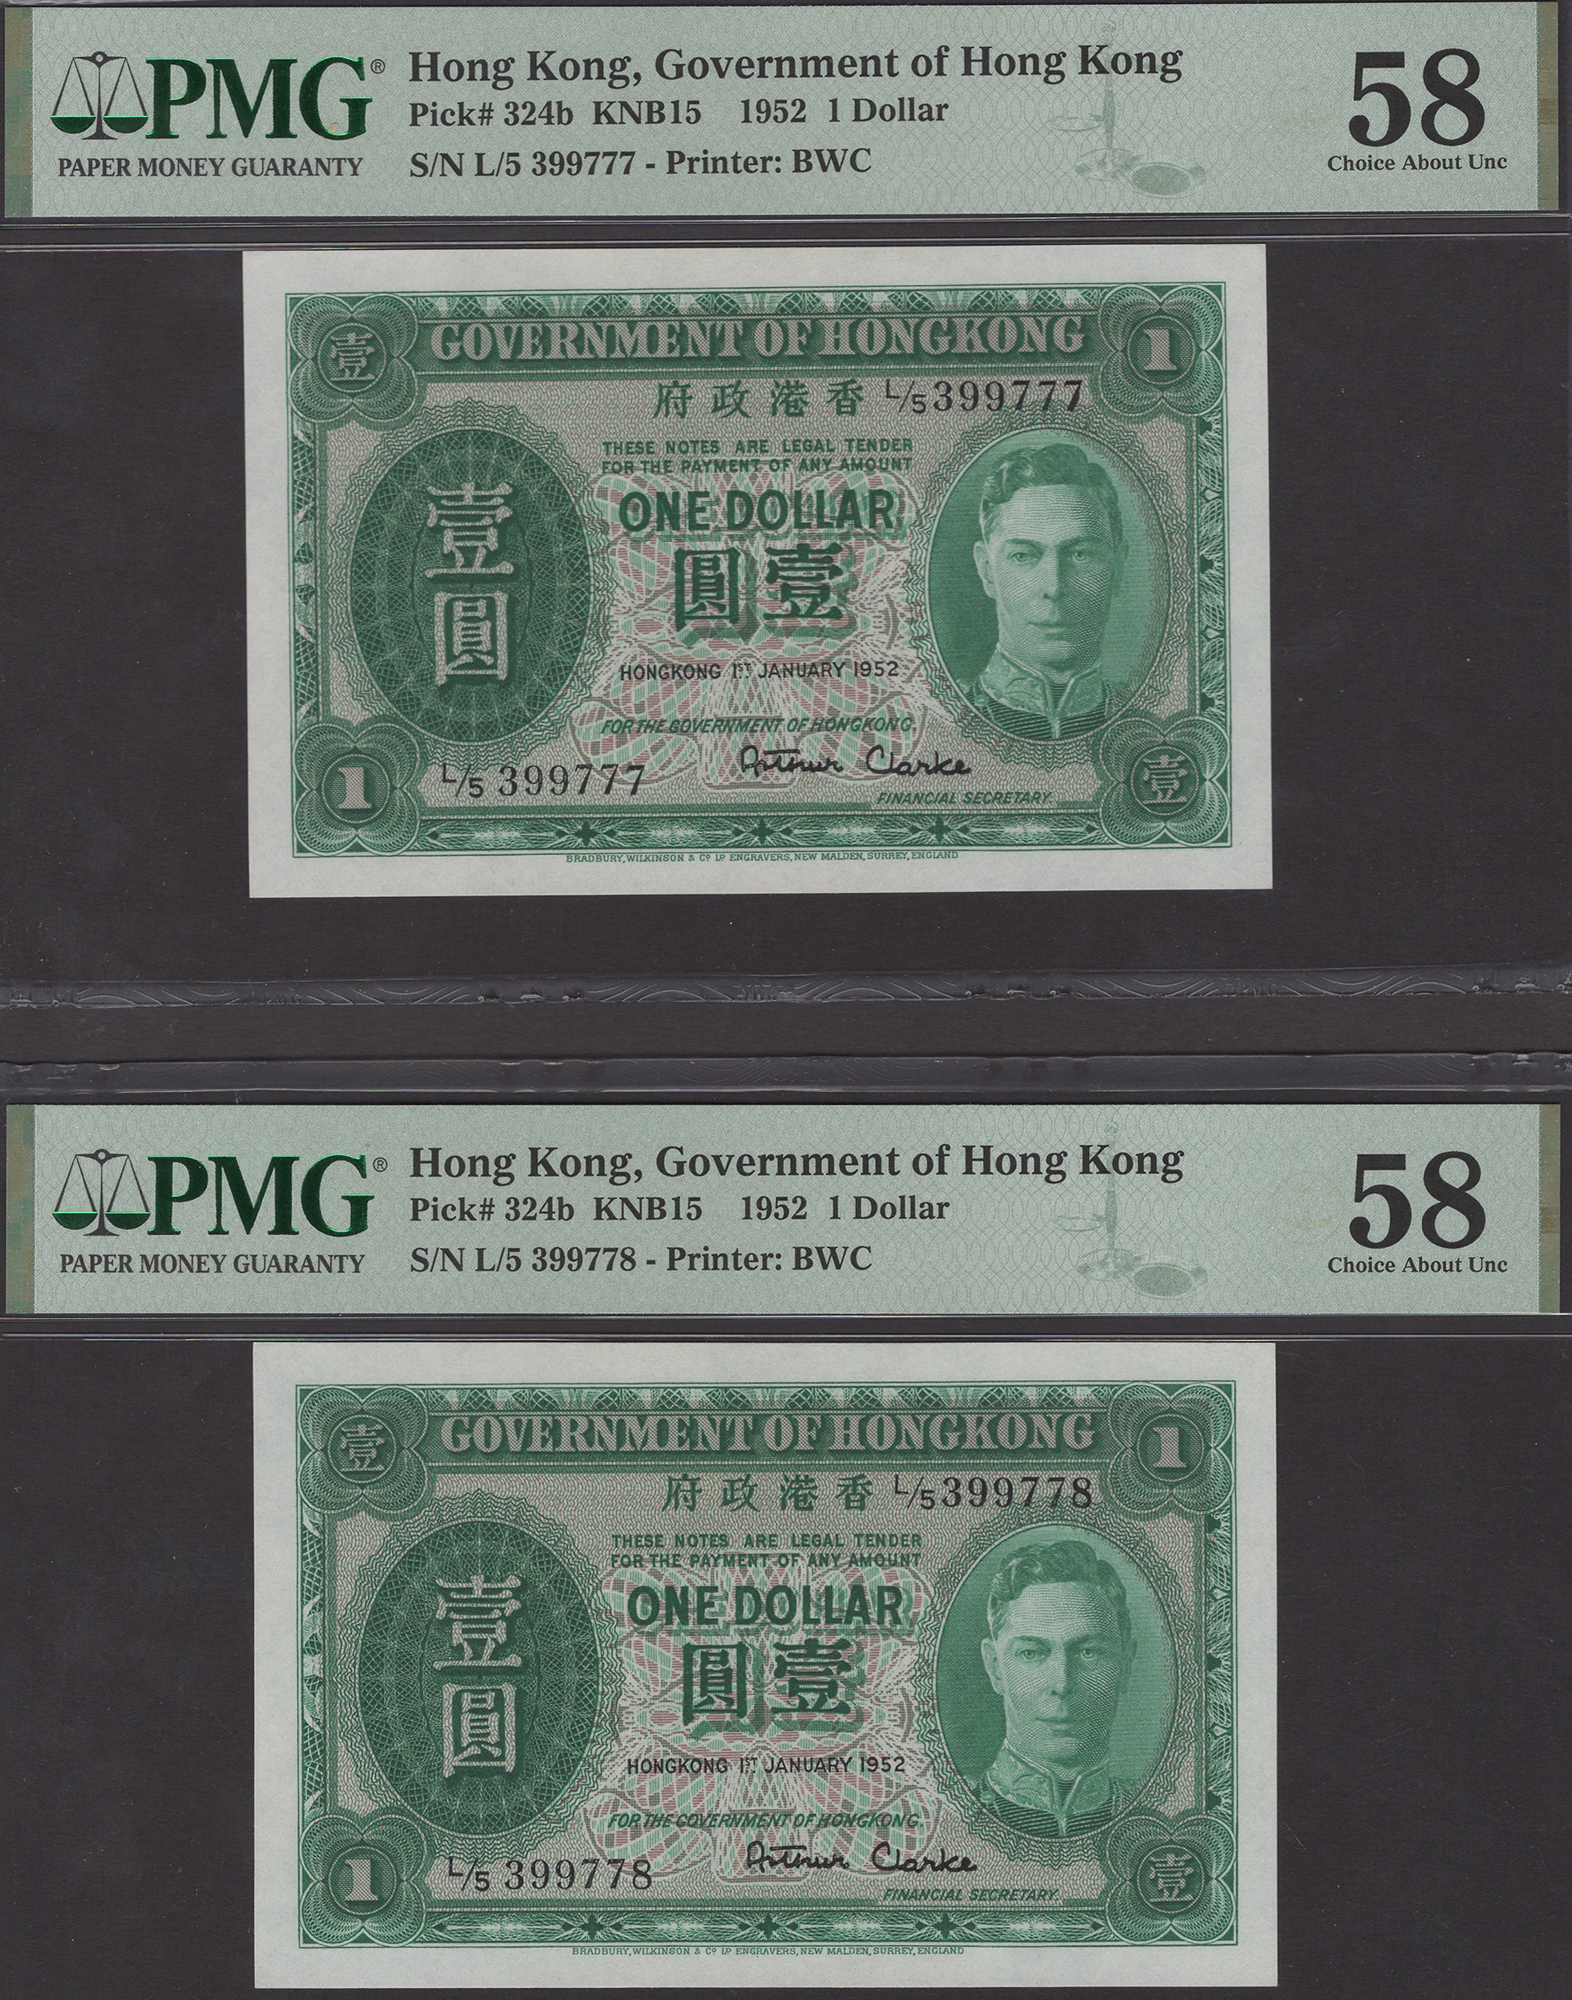 Government of Hong Kong, $1 (2), 1 January 1952, serial number L/5 399777-78, Arthur Clarke...